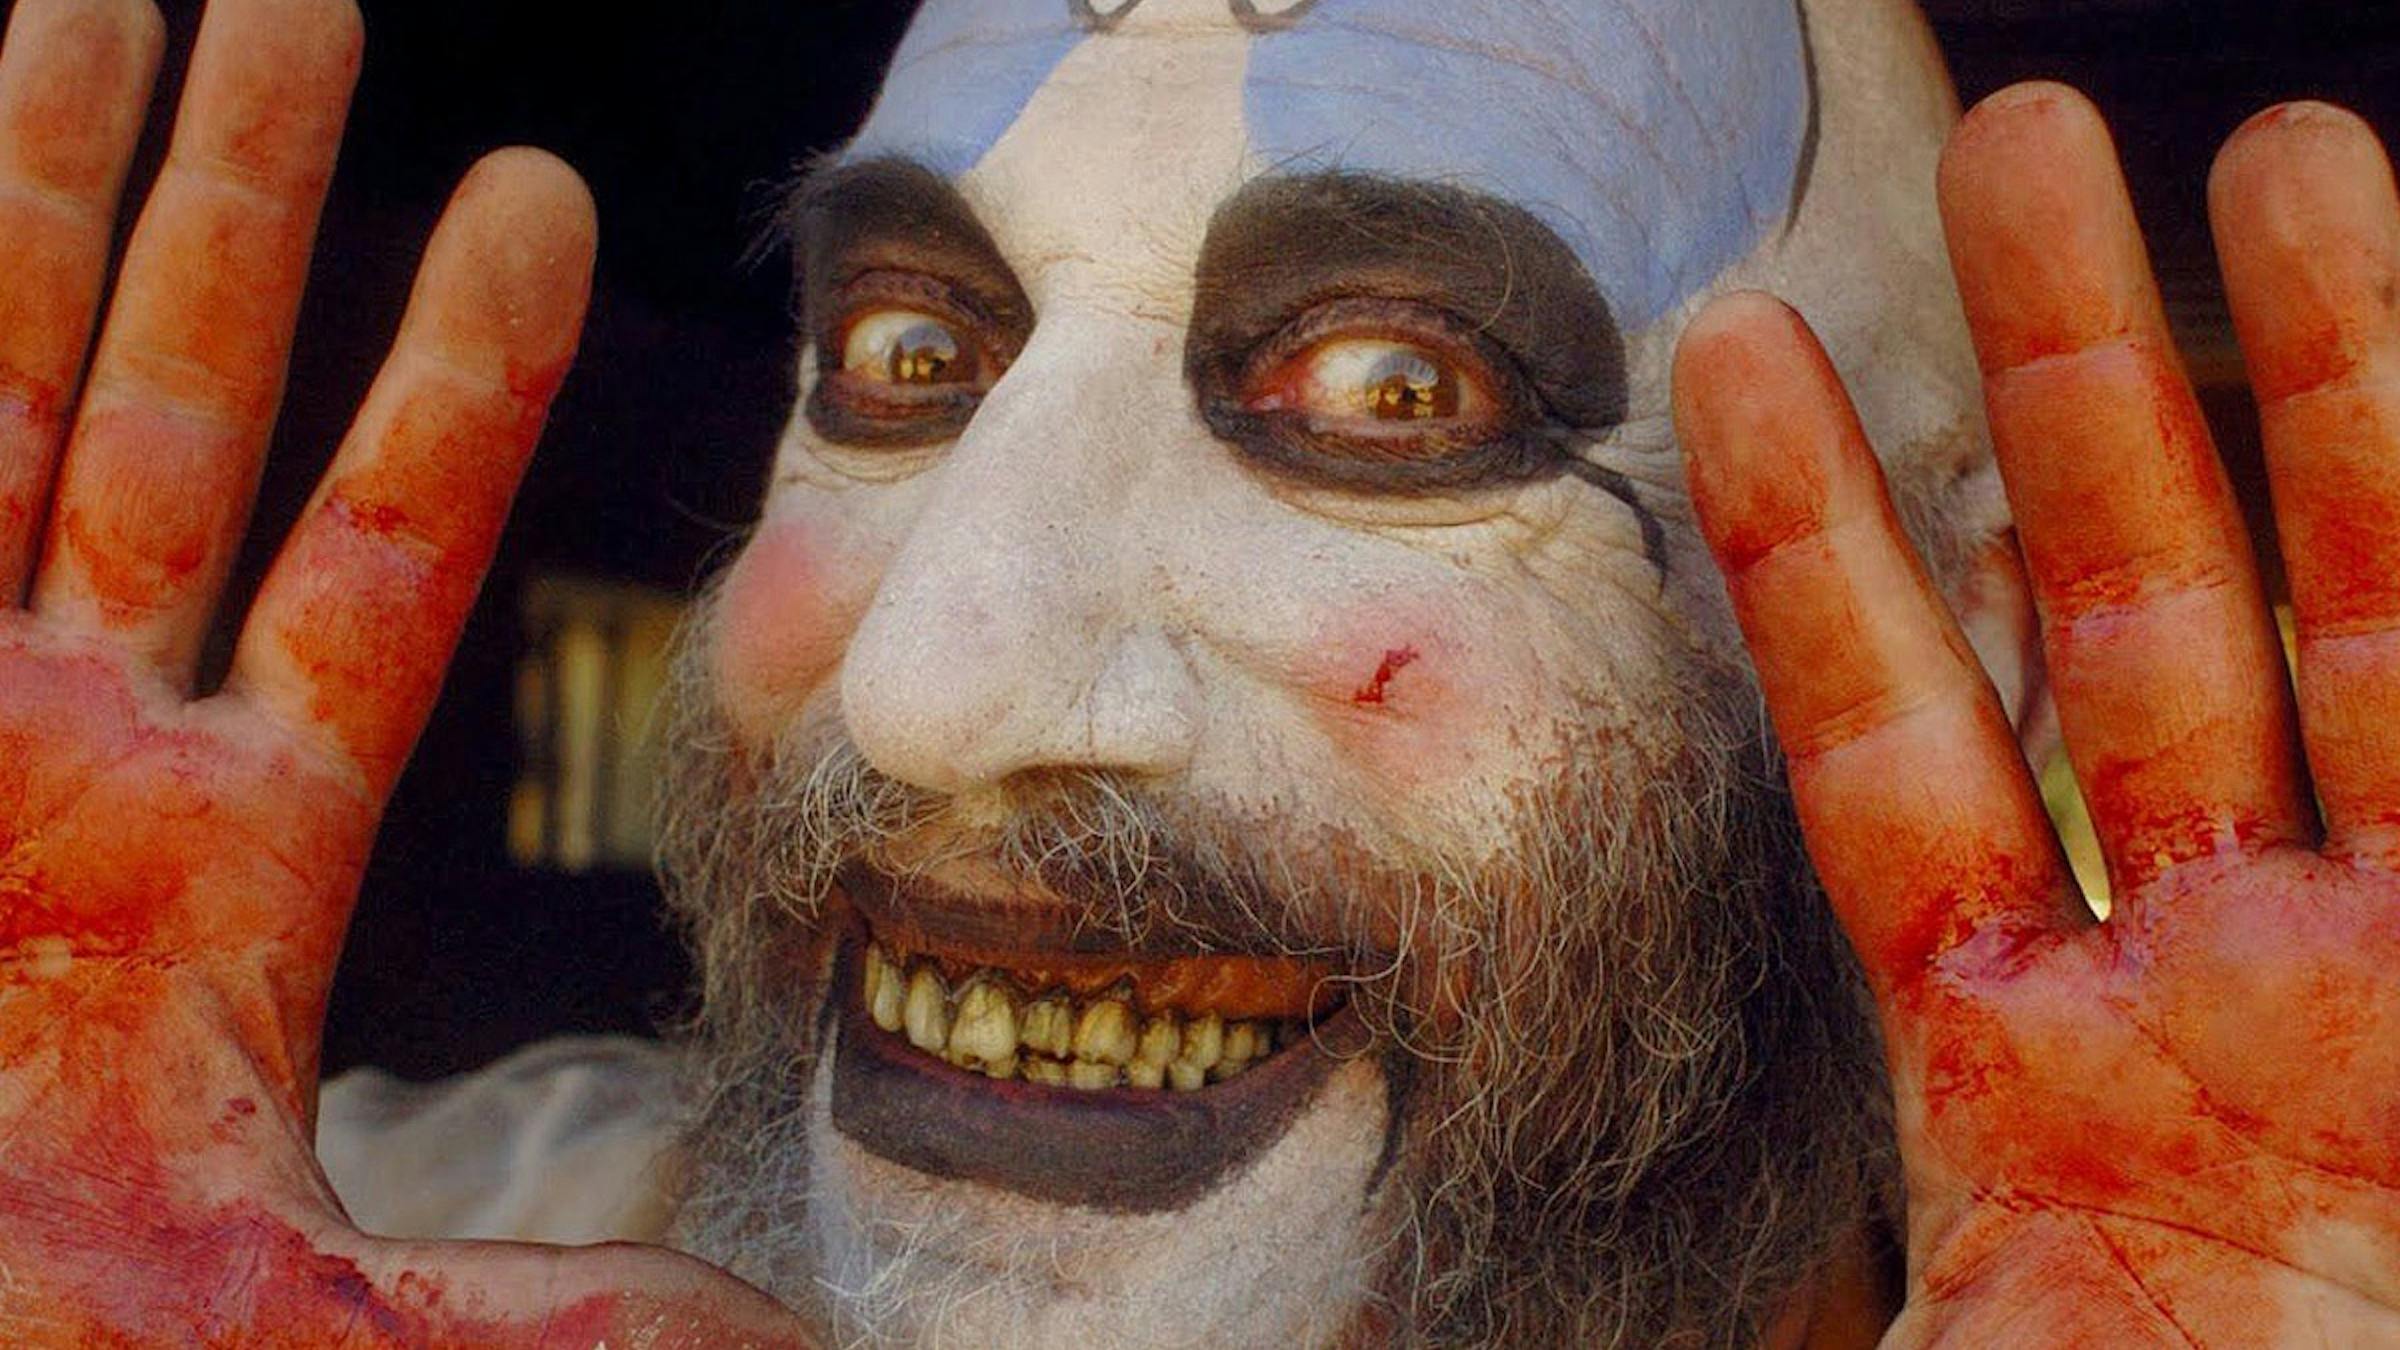 Never Turn Your Back On A Clown: Remembering Sid Haig